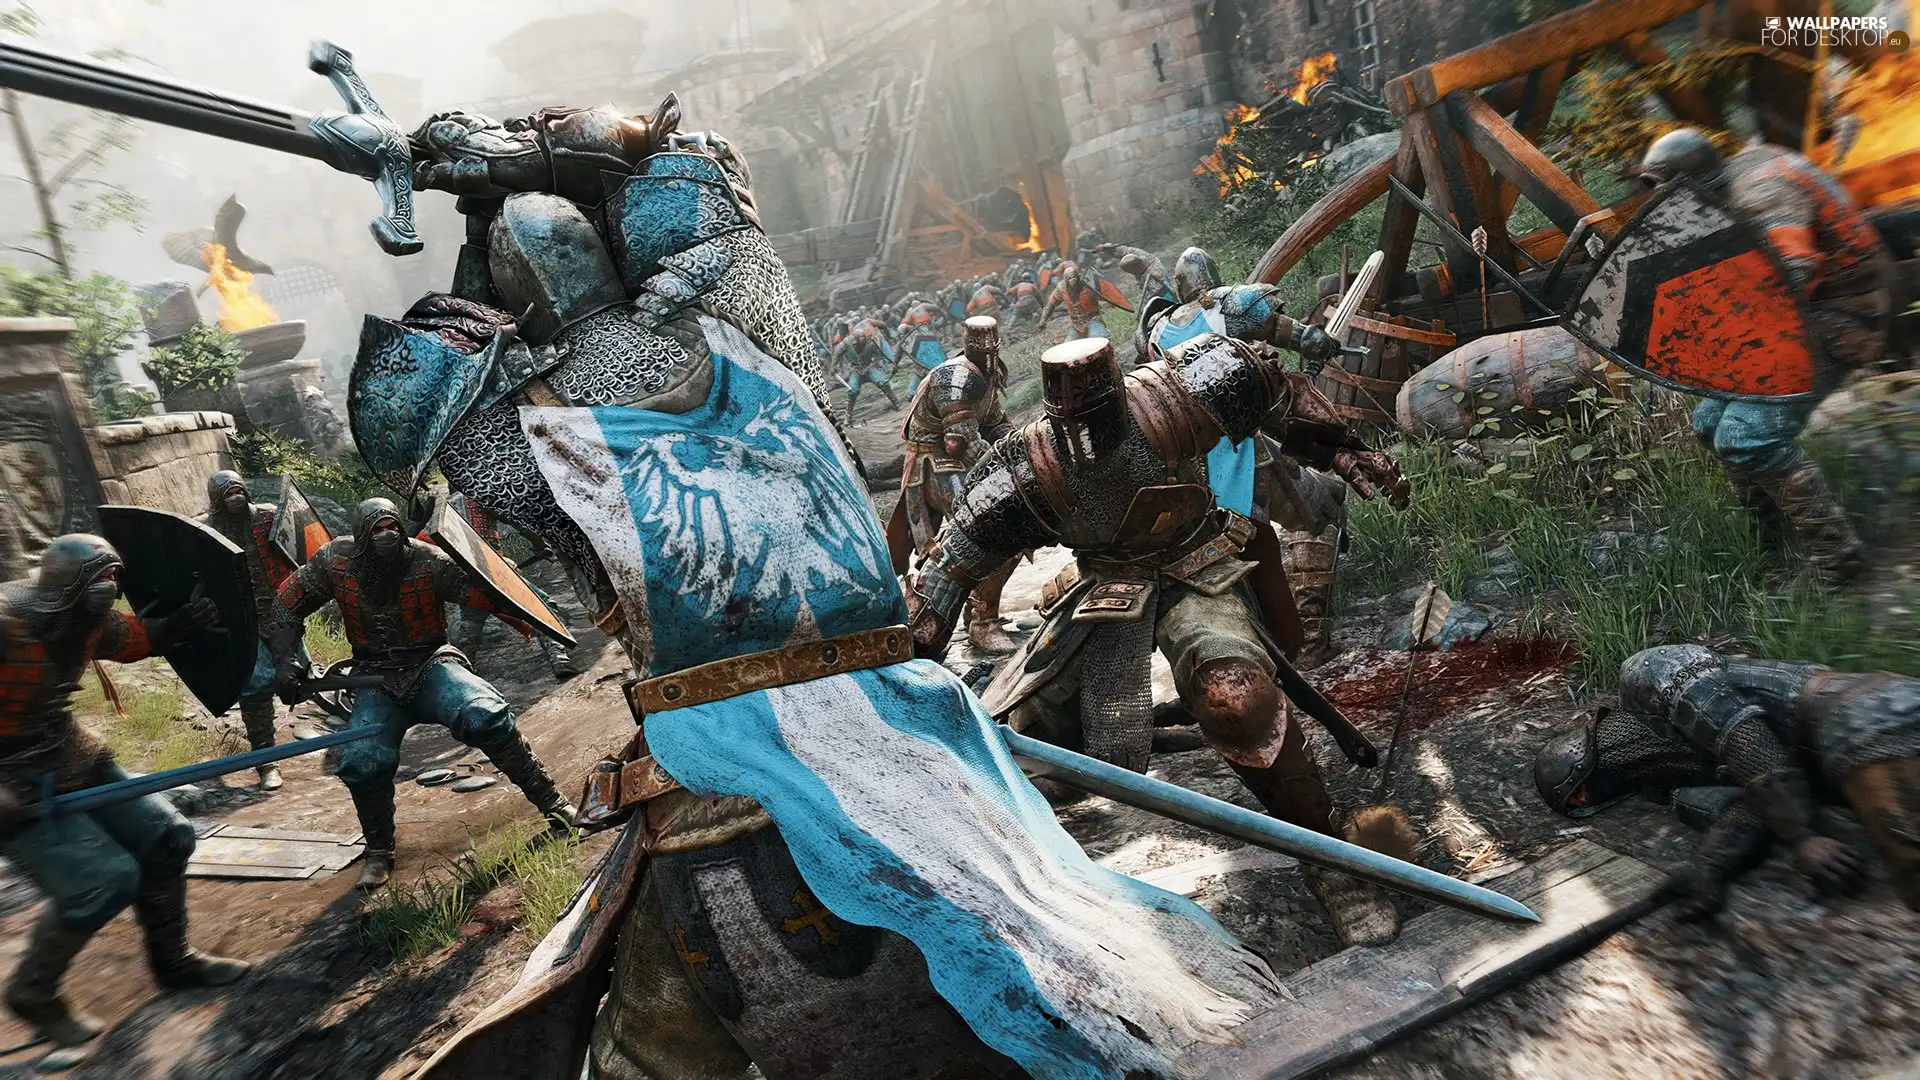 security, game, knights, Fight, sword, For Honor